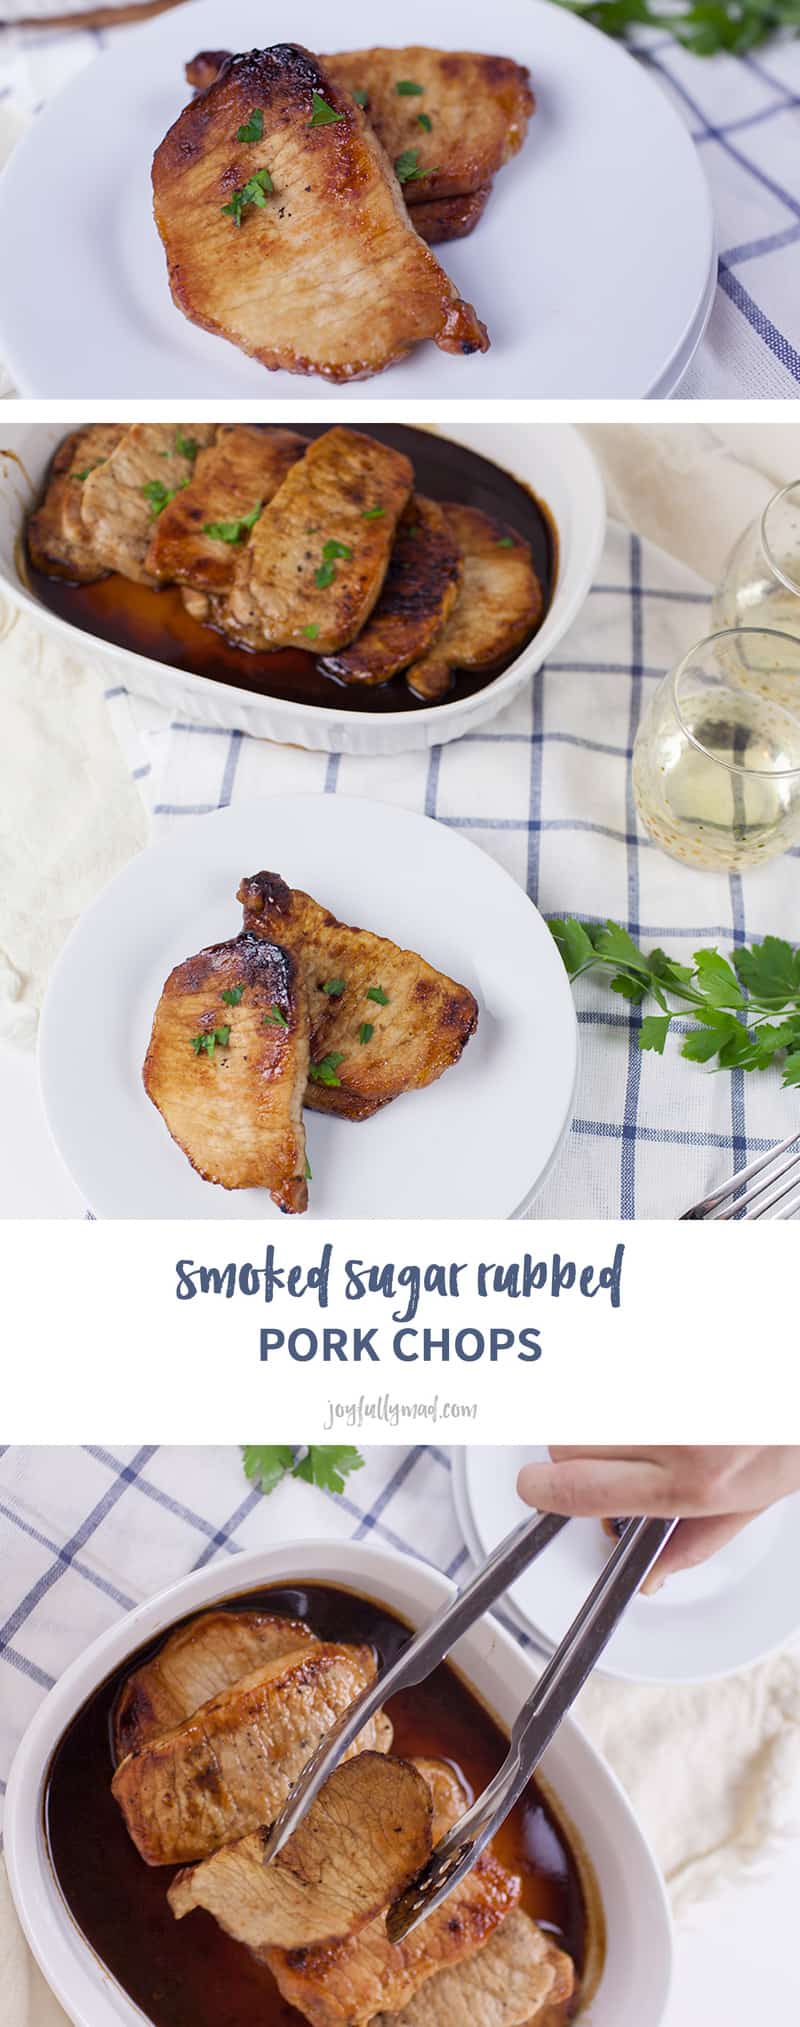 Dinners can be chaotic with varying work schedules and commitments, which is why we like to keep dinner simple. This rubbed pork chop recipe can be made in less than 30 minutes and will make the whole family happy!